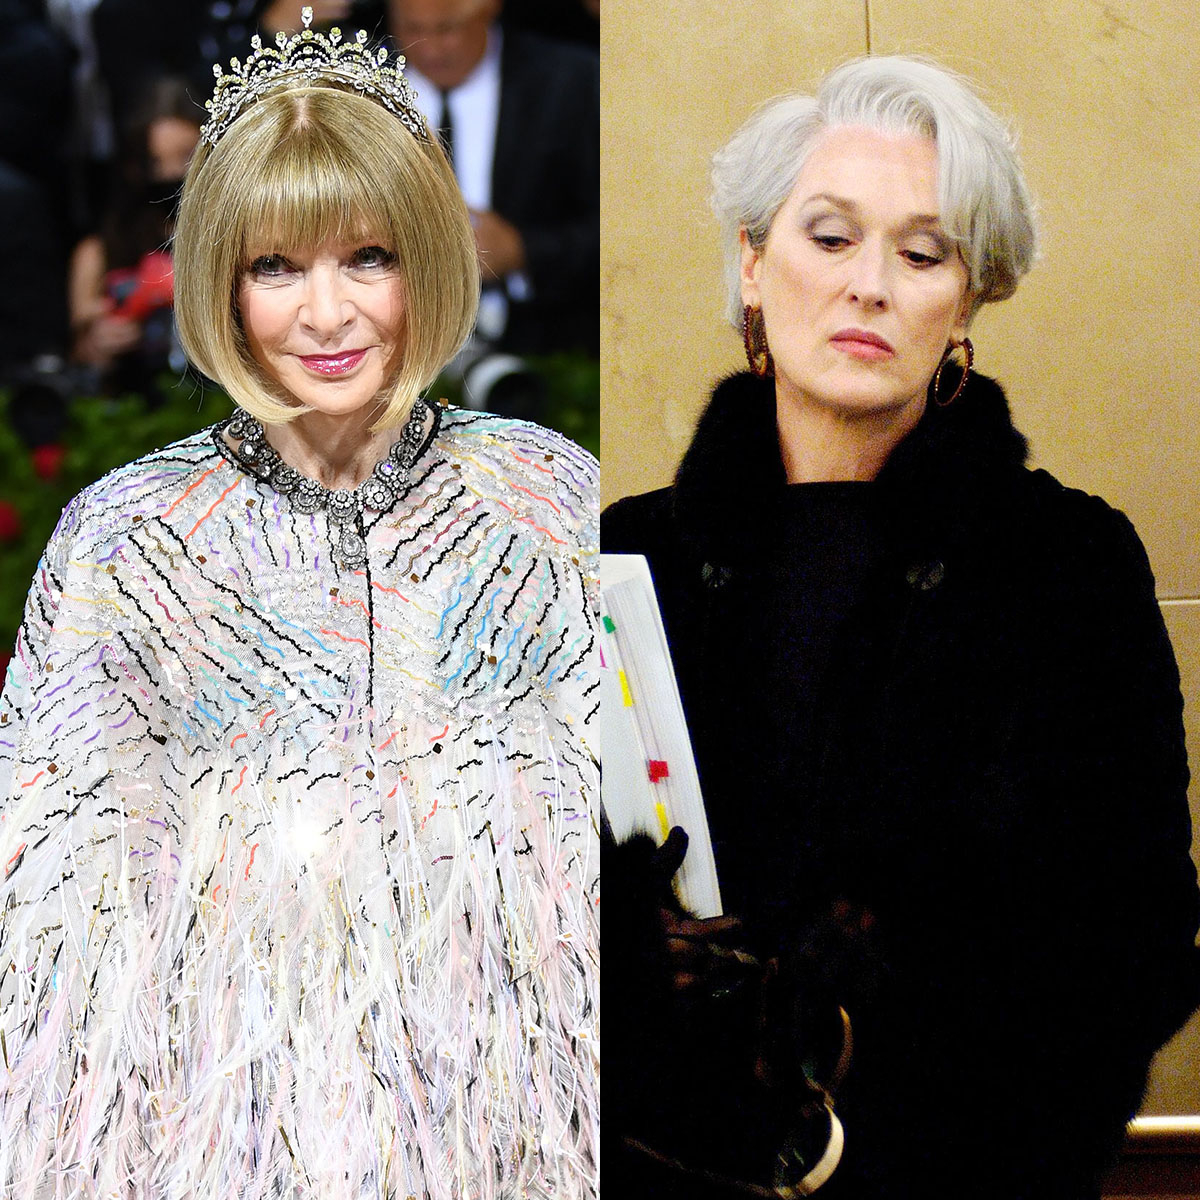 Find Out How Similar Anna Wintour Really Is to Miranda Priestly - E! Online